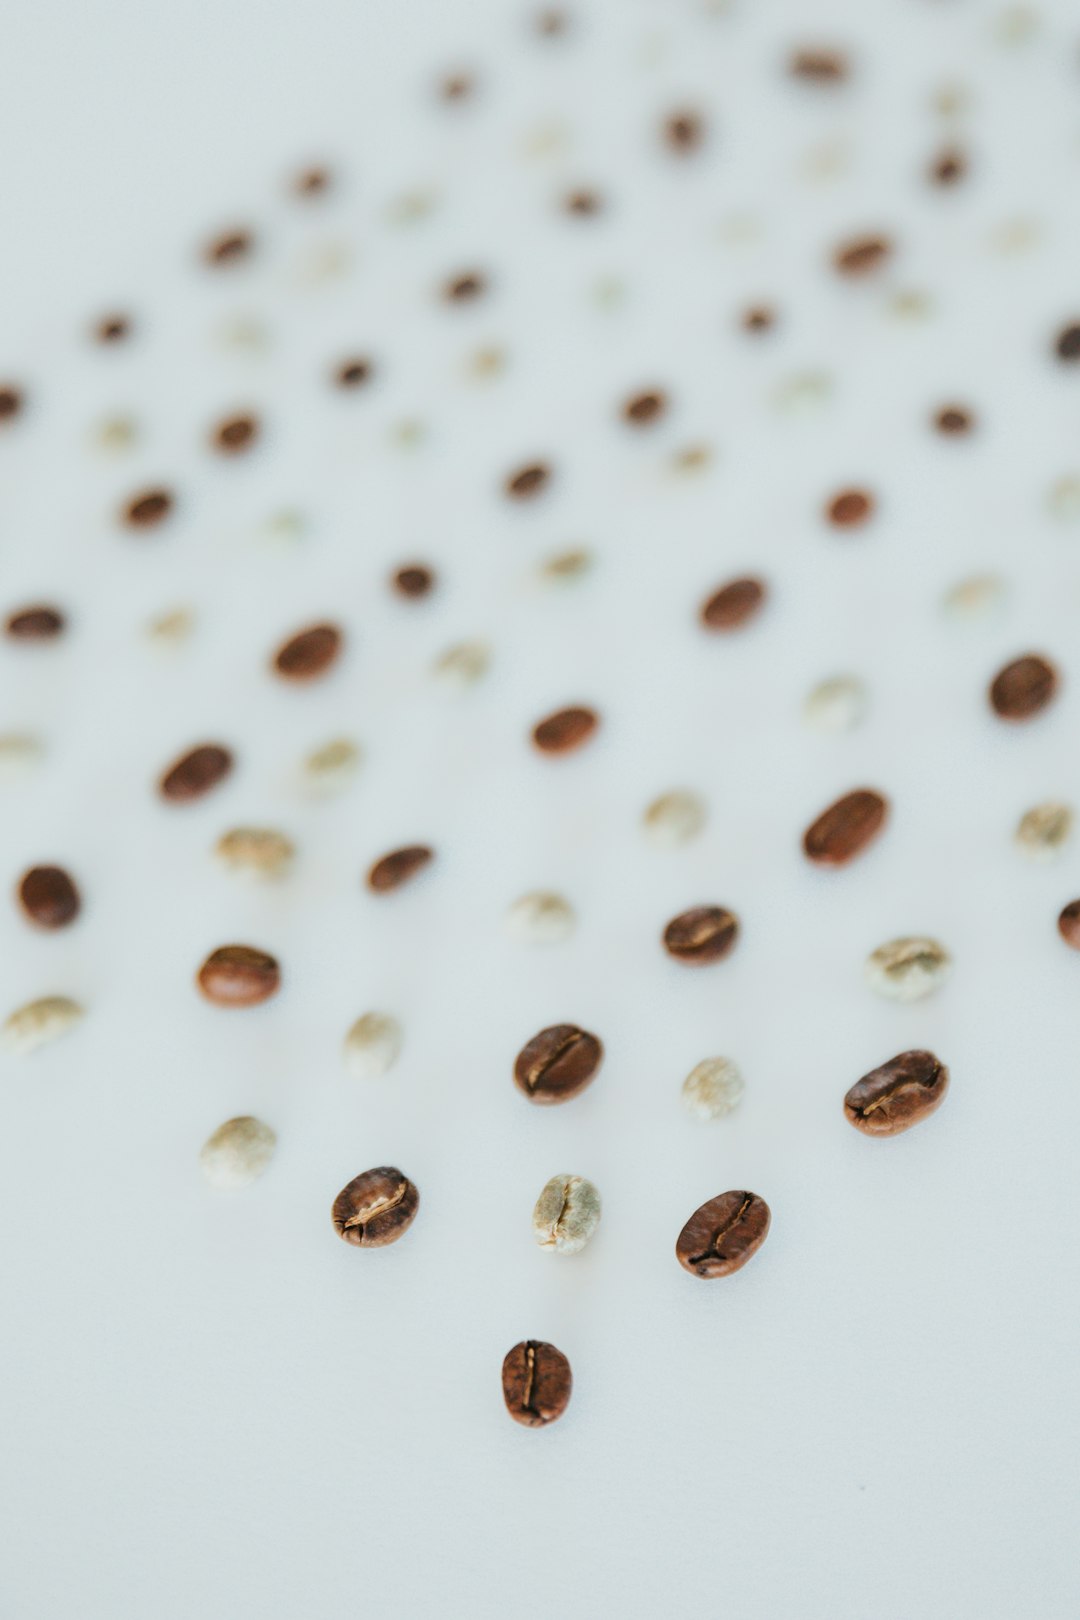 brown and white beads on white surface